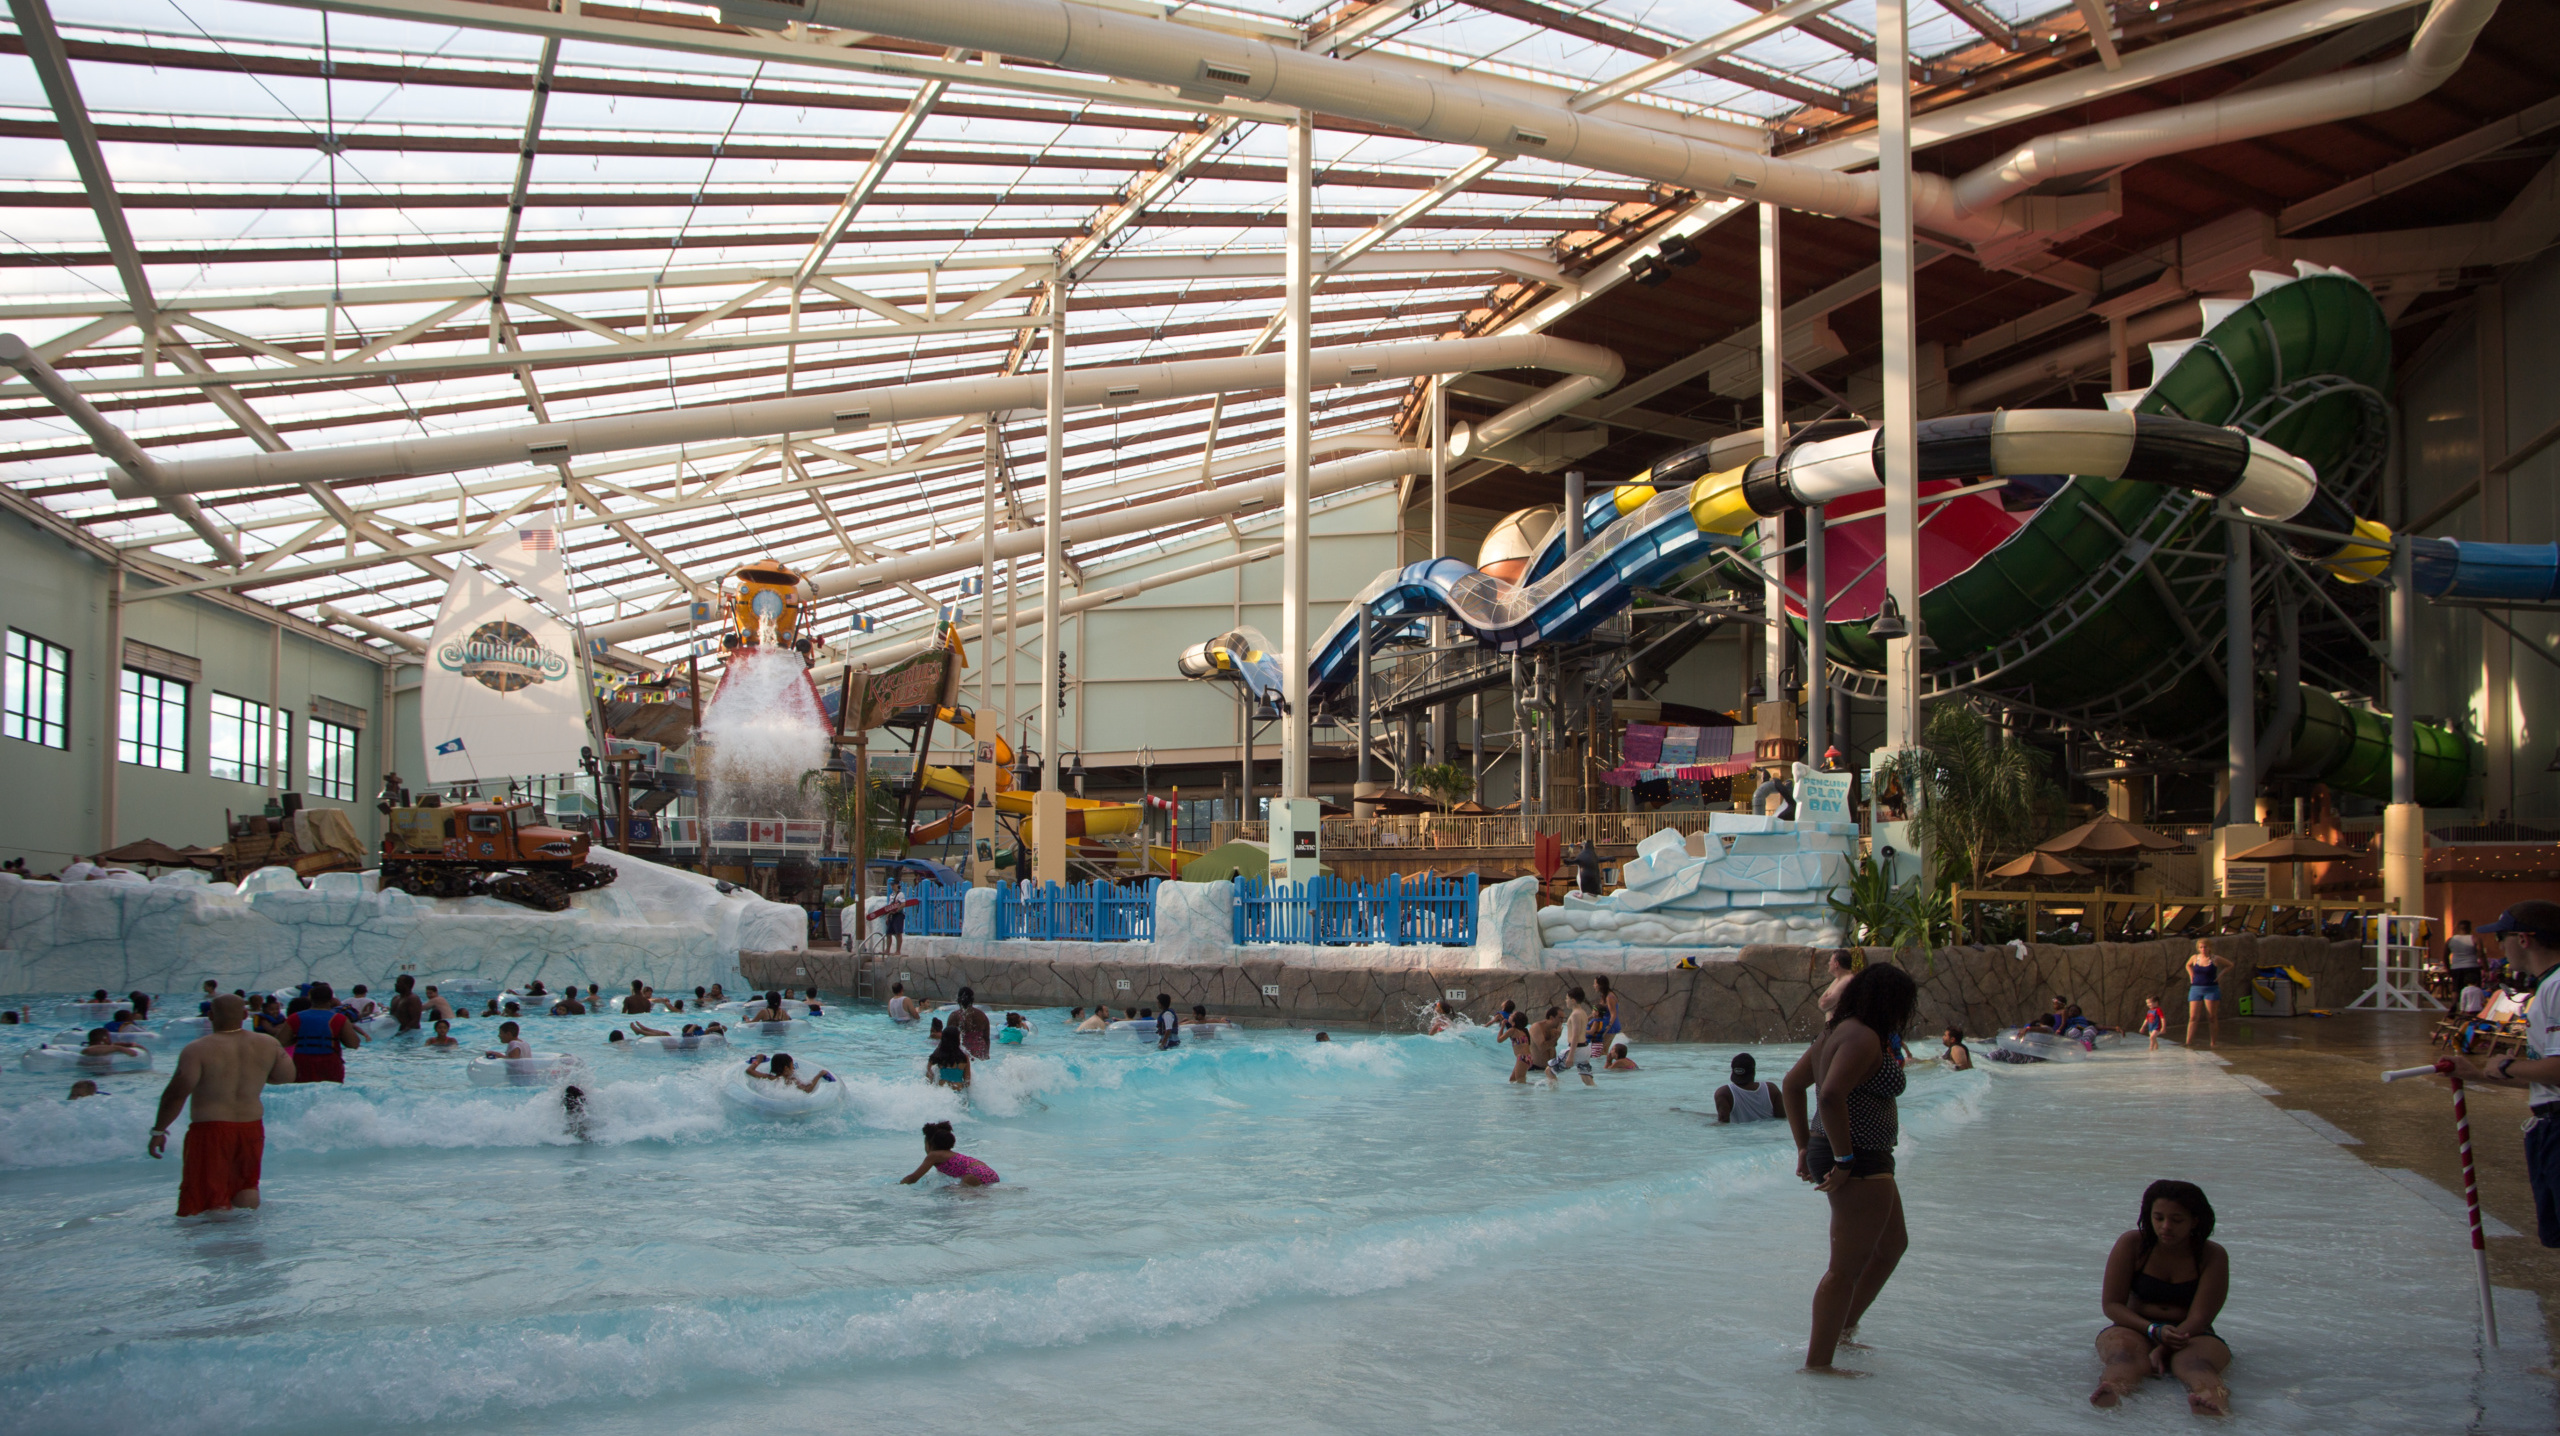 Overview, Aquatopia Indoor Waterpark, Camelback Lodge, Tannersville, USA